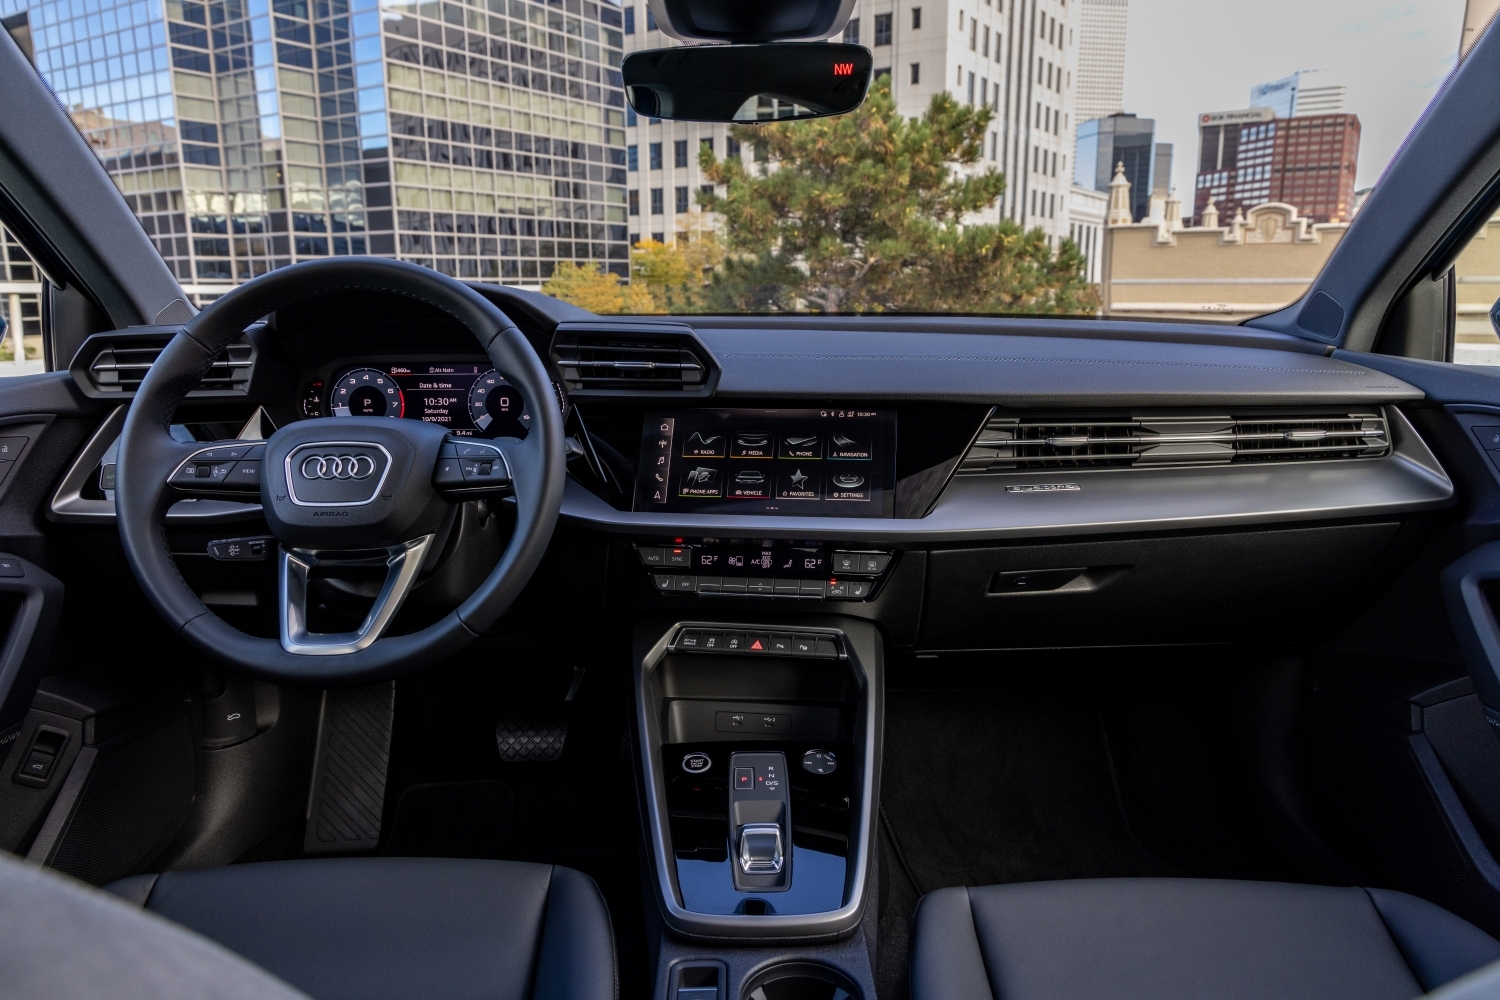 Interior shot of the 2022 Audi A3 sedan, showing the steering wheel, dashboard, infotainment system, and shifter